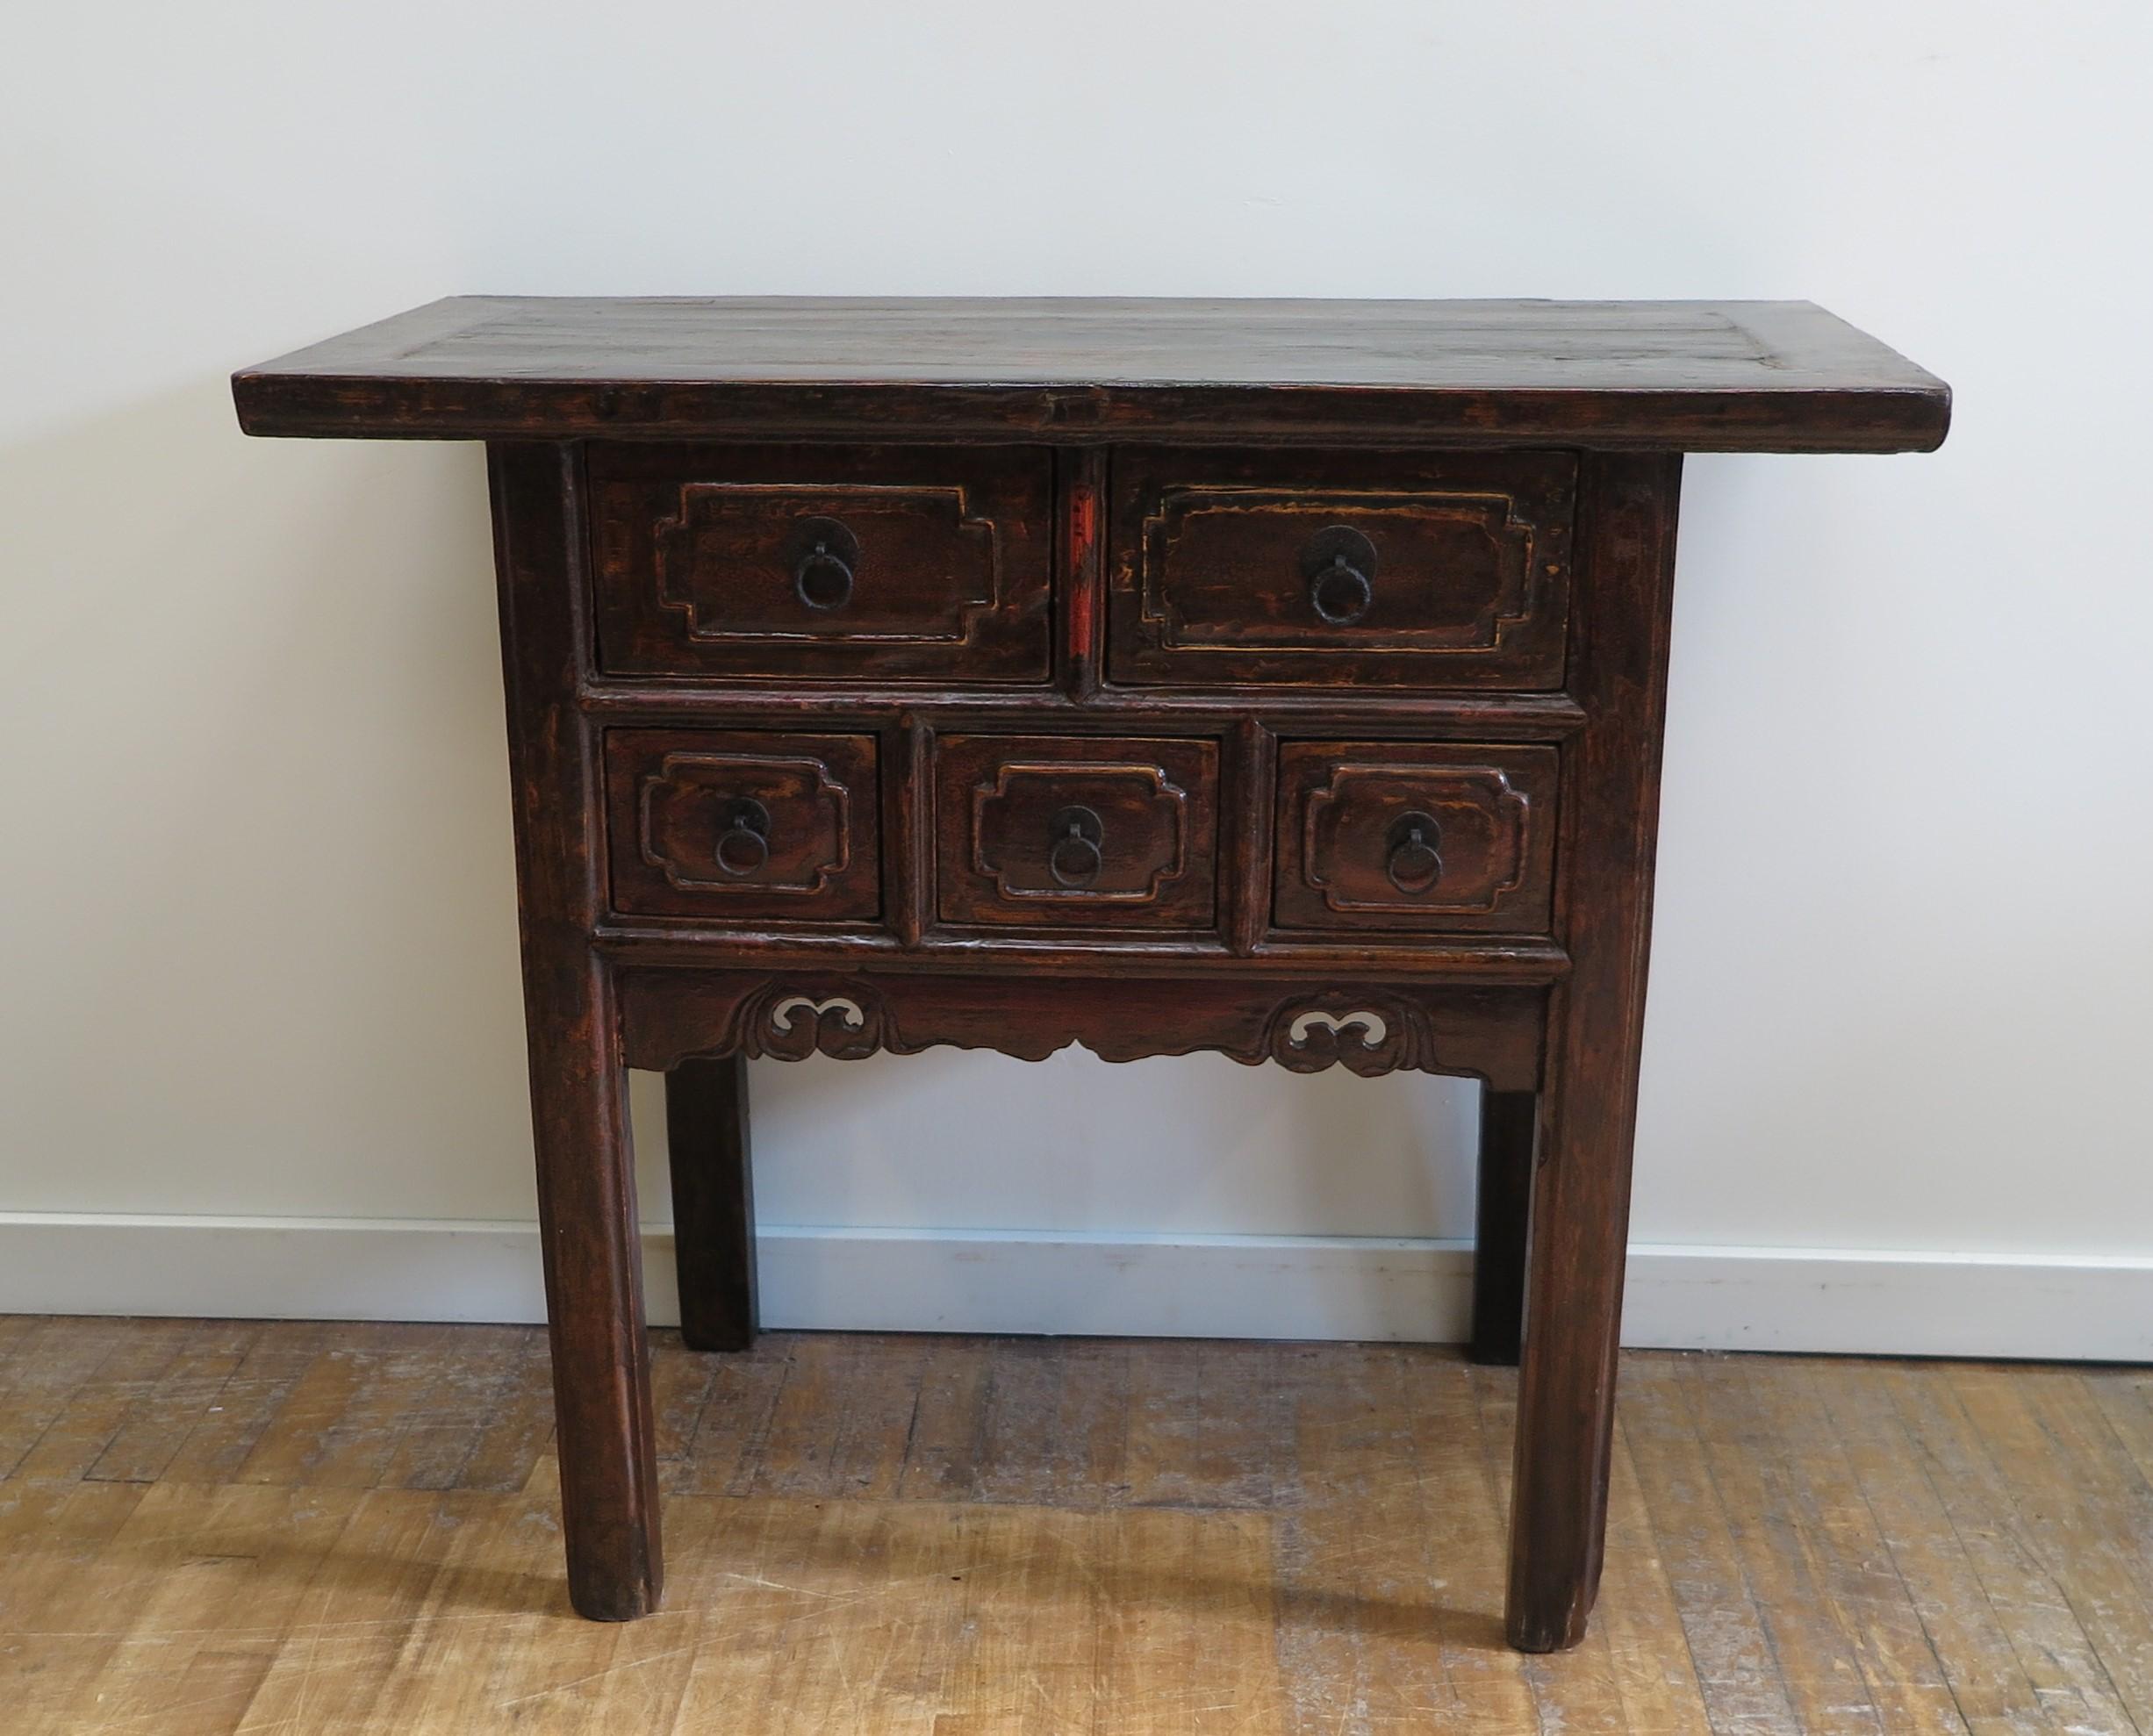 19th century Rustic Table five-drawer console table, also referred to as a wine table.  Antique Chinese table with carved drawer plates, lower carved apron and a beautiful patina having worn red lacquer showing through, circa 1850.  This is a